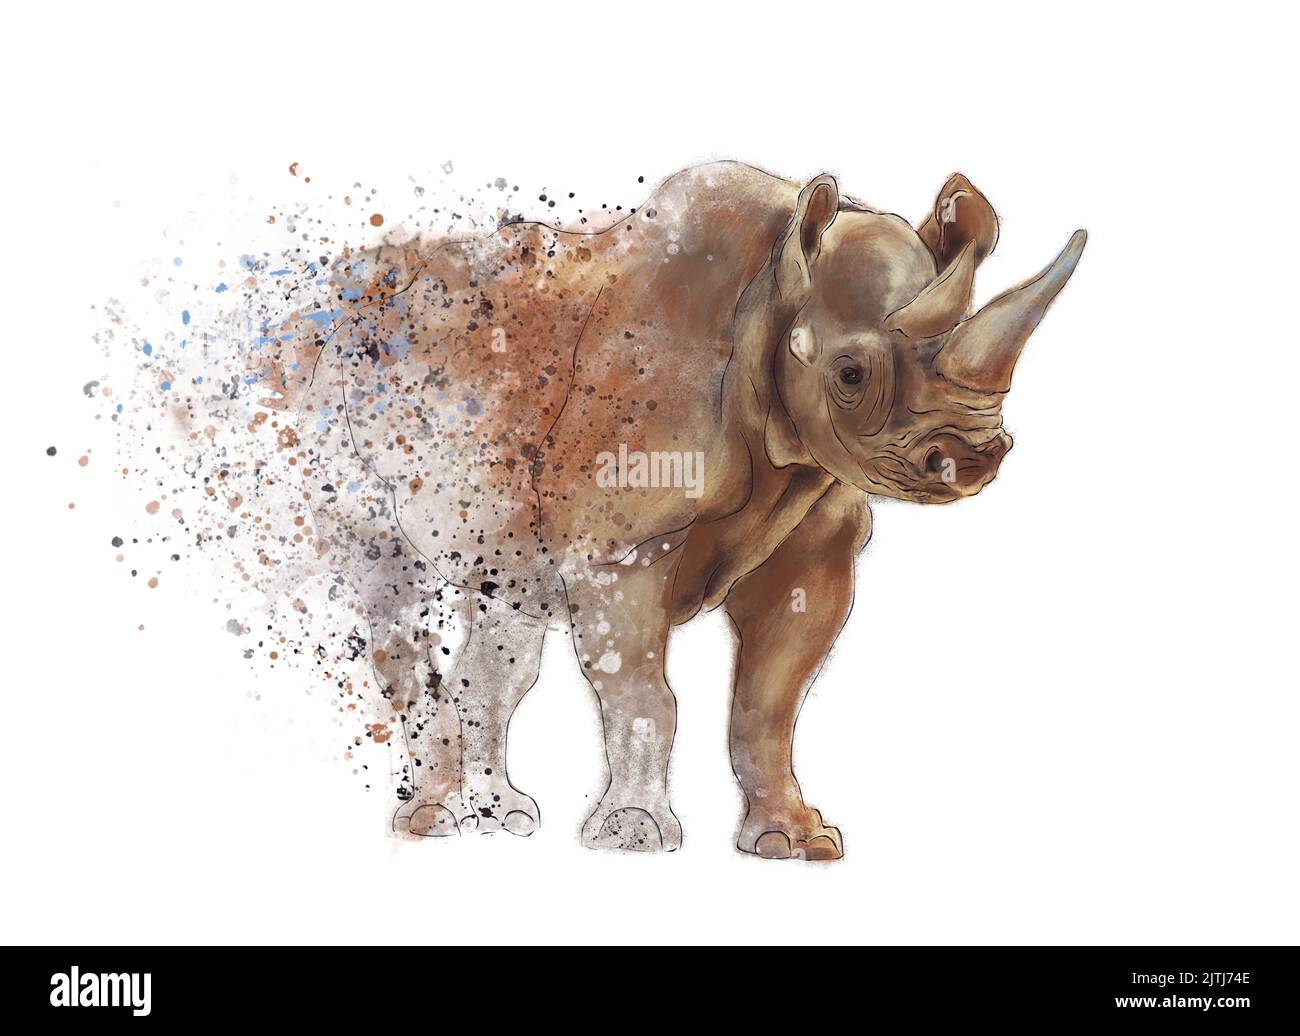 Rhinoceros Watercolor .Digital Painting on White Background Stock Photo